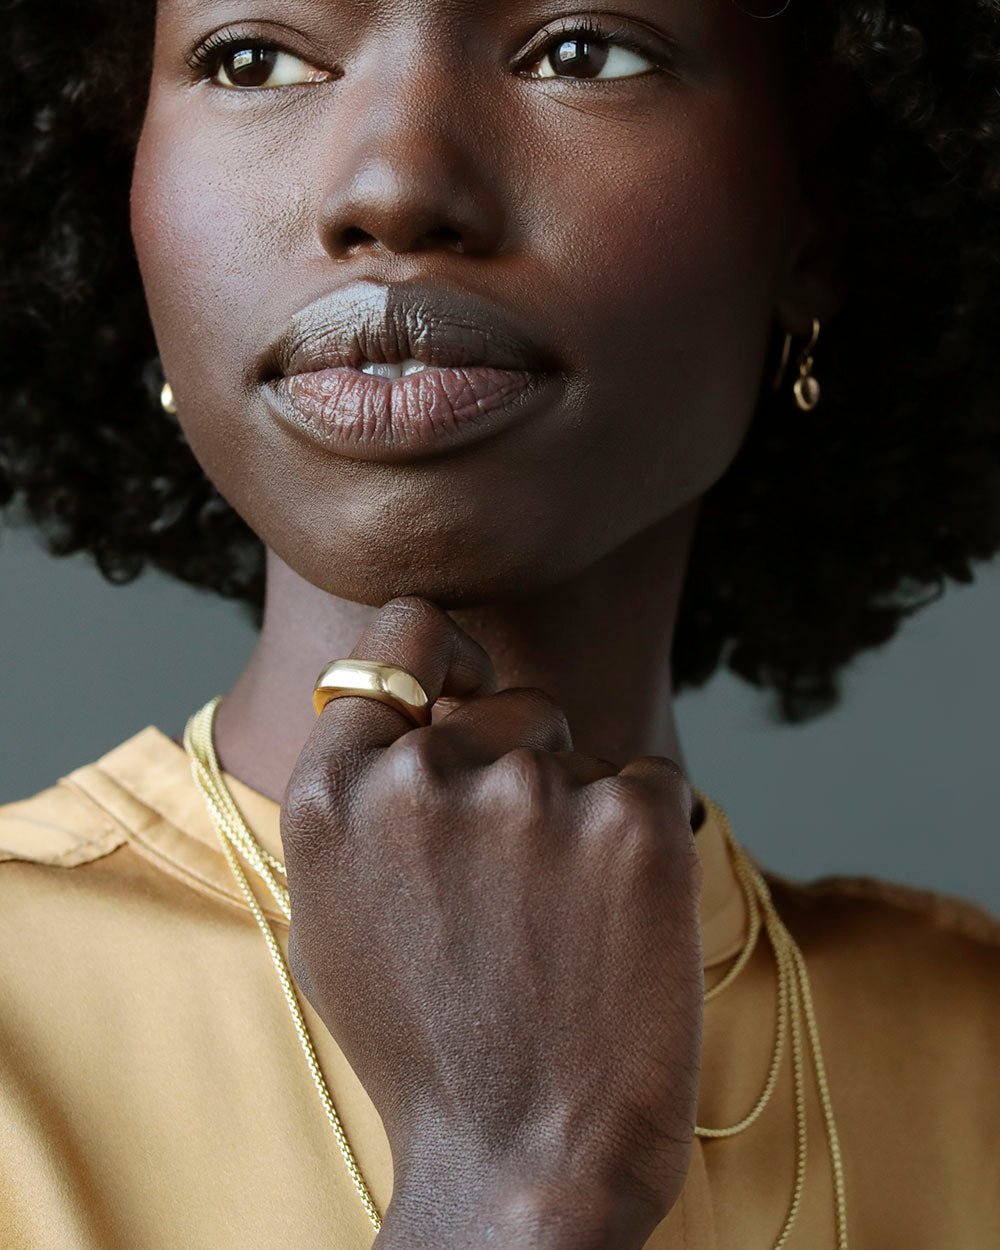 Black woman with hand on her chin, wearing Solid 18k yellow gold heavy wedding band on ring finger. Noble Ring by George Rings for men, women, and all genders.